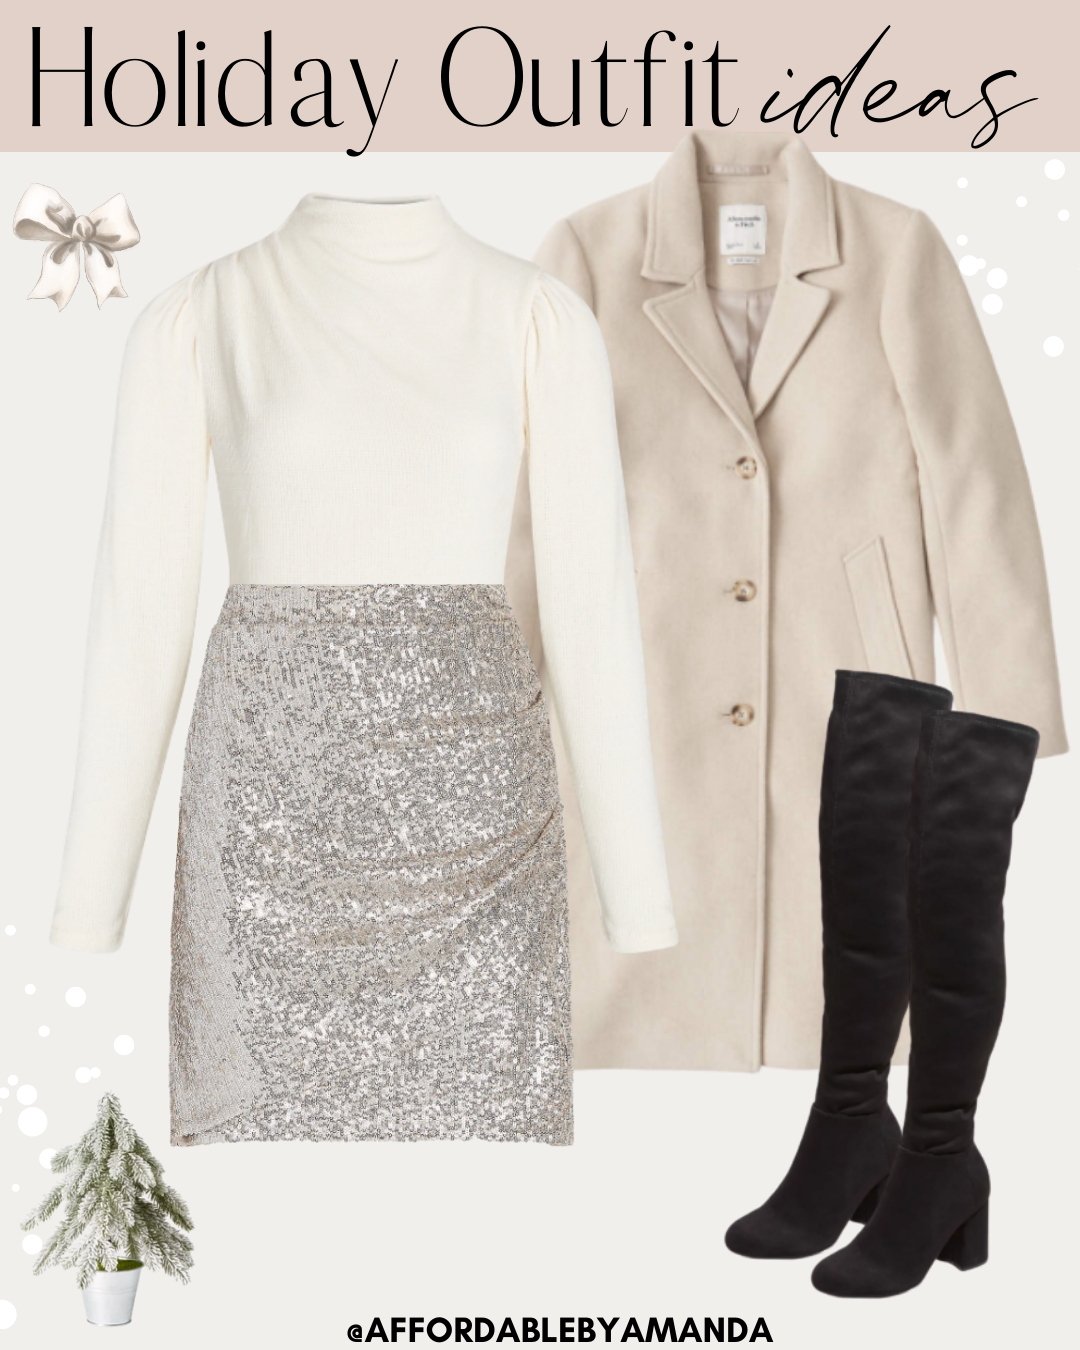 Best Holiday Outfits - 20 Holiday Outfits to Wear for 2020 - Affordable by Amanda